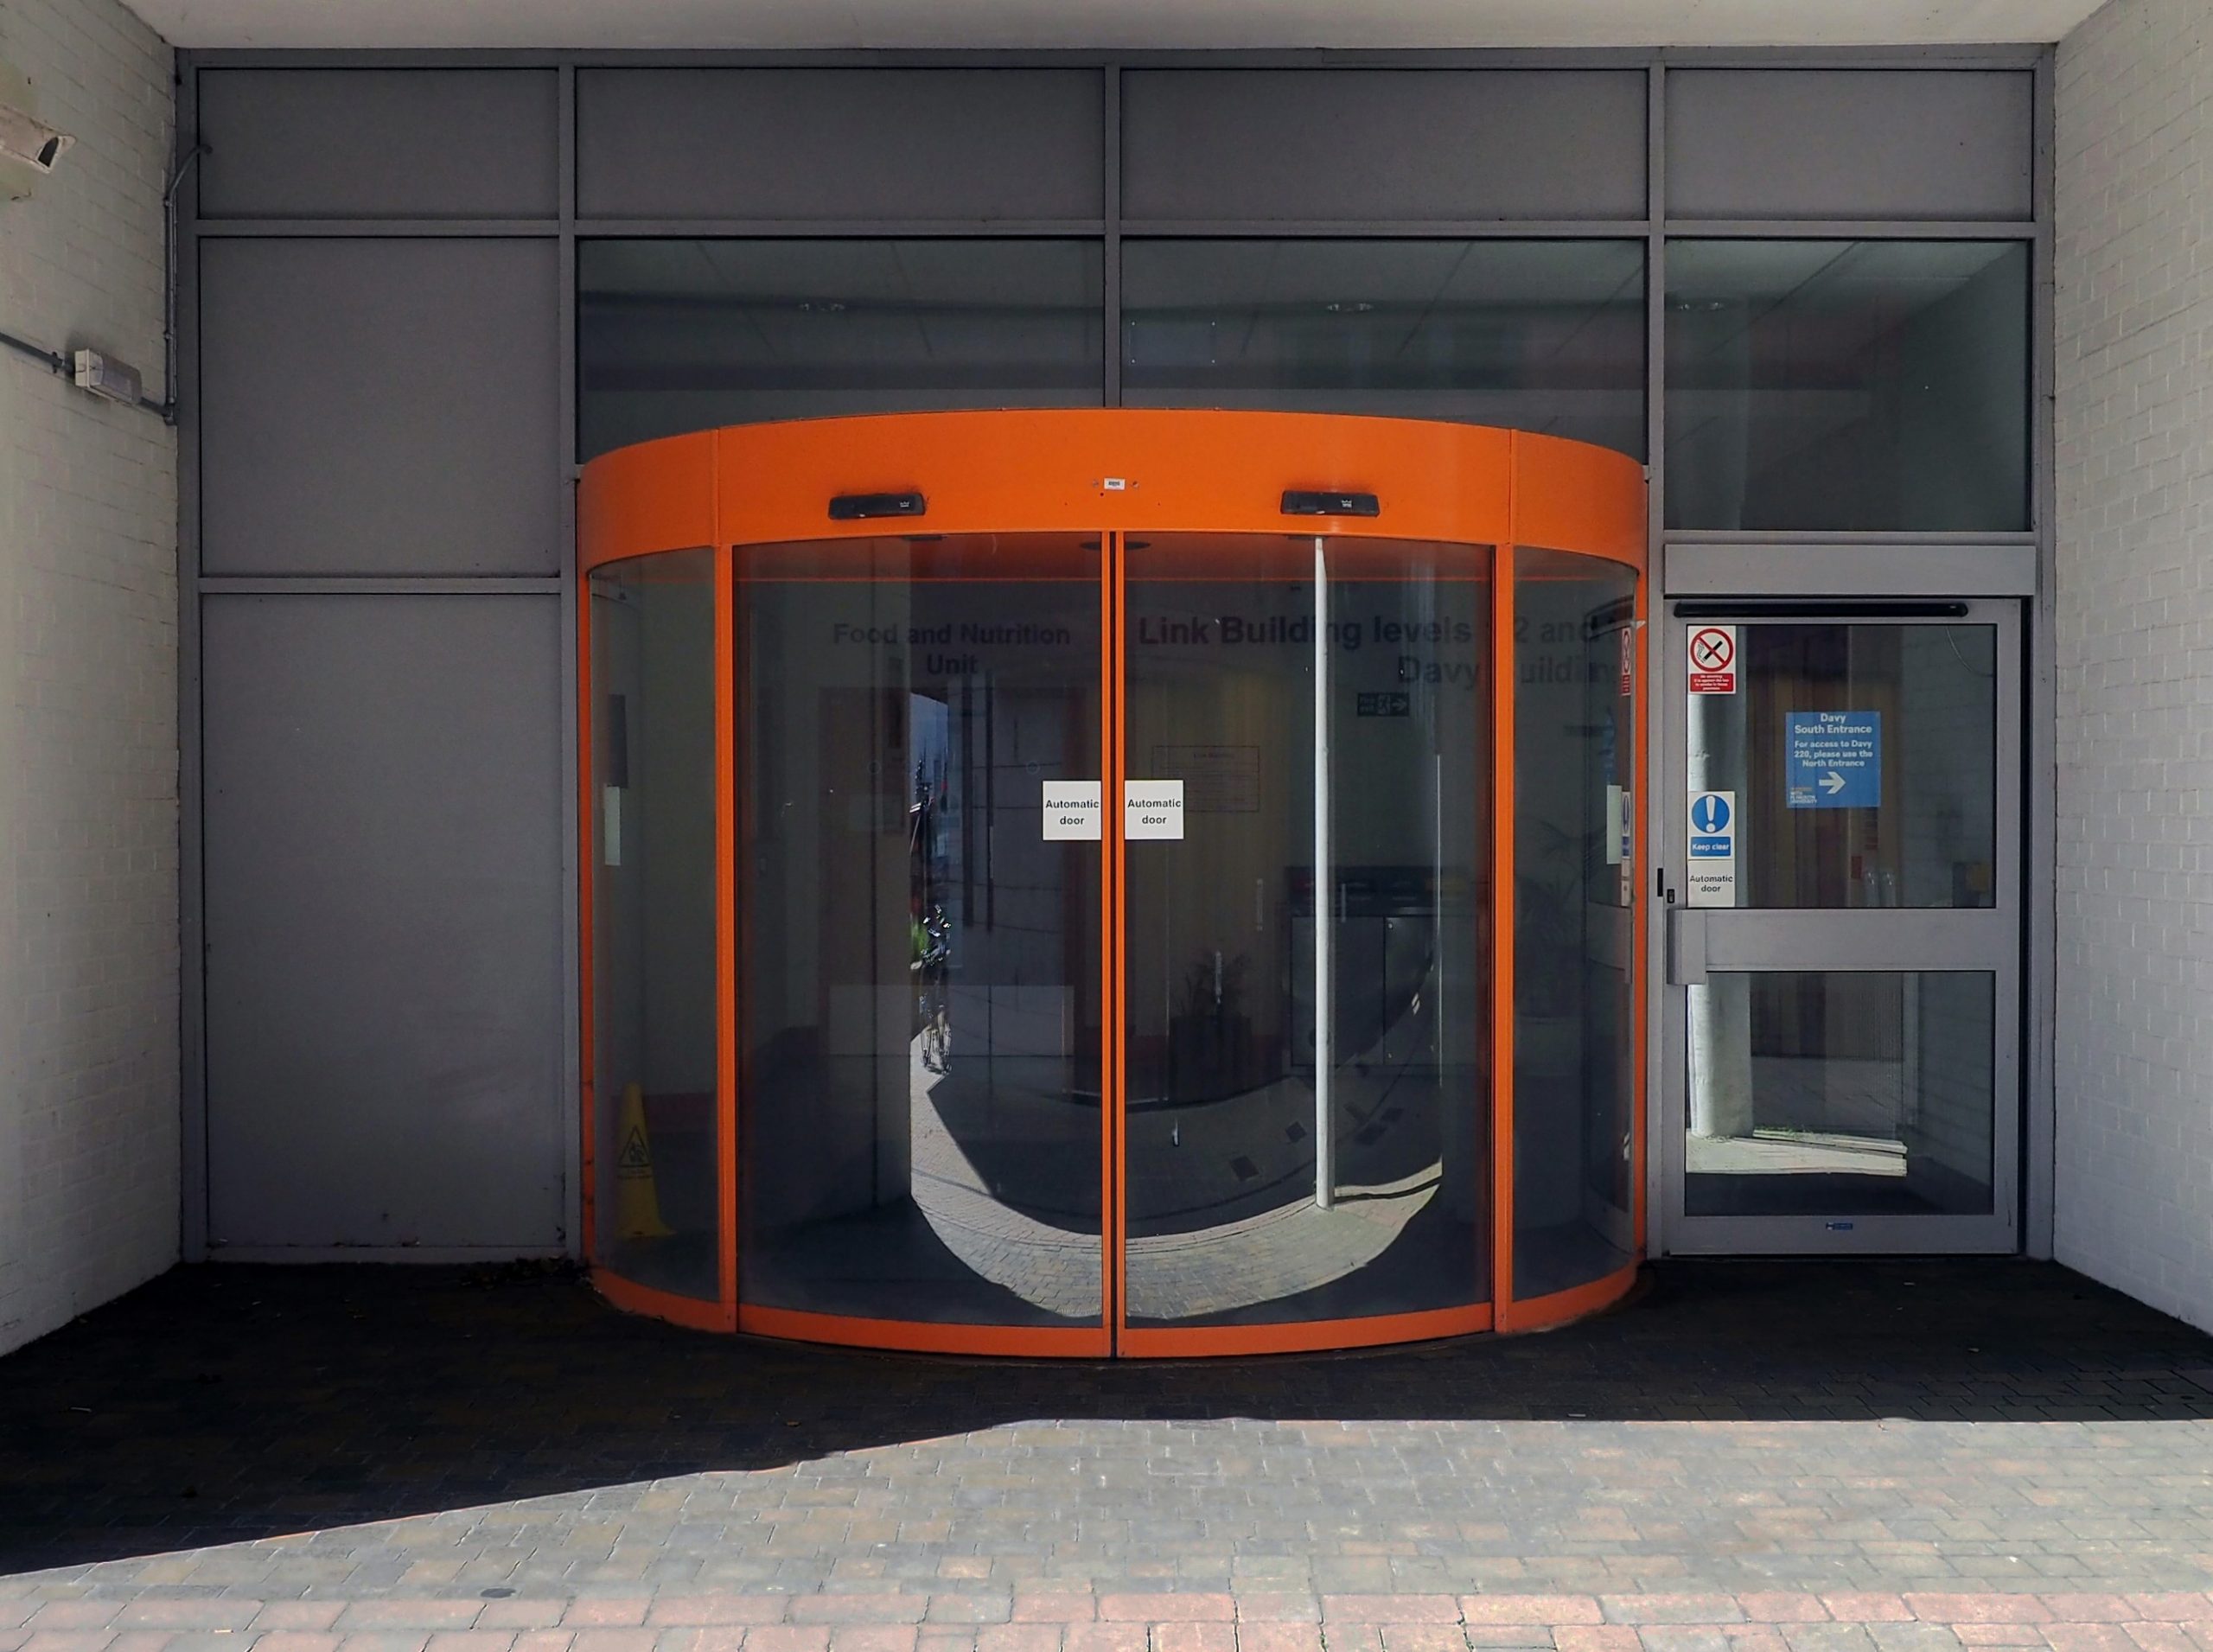 Accessible entrance to a building at ground level with automatic doors.